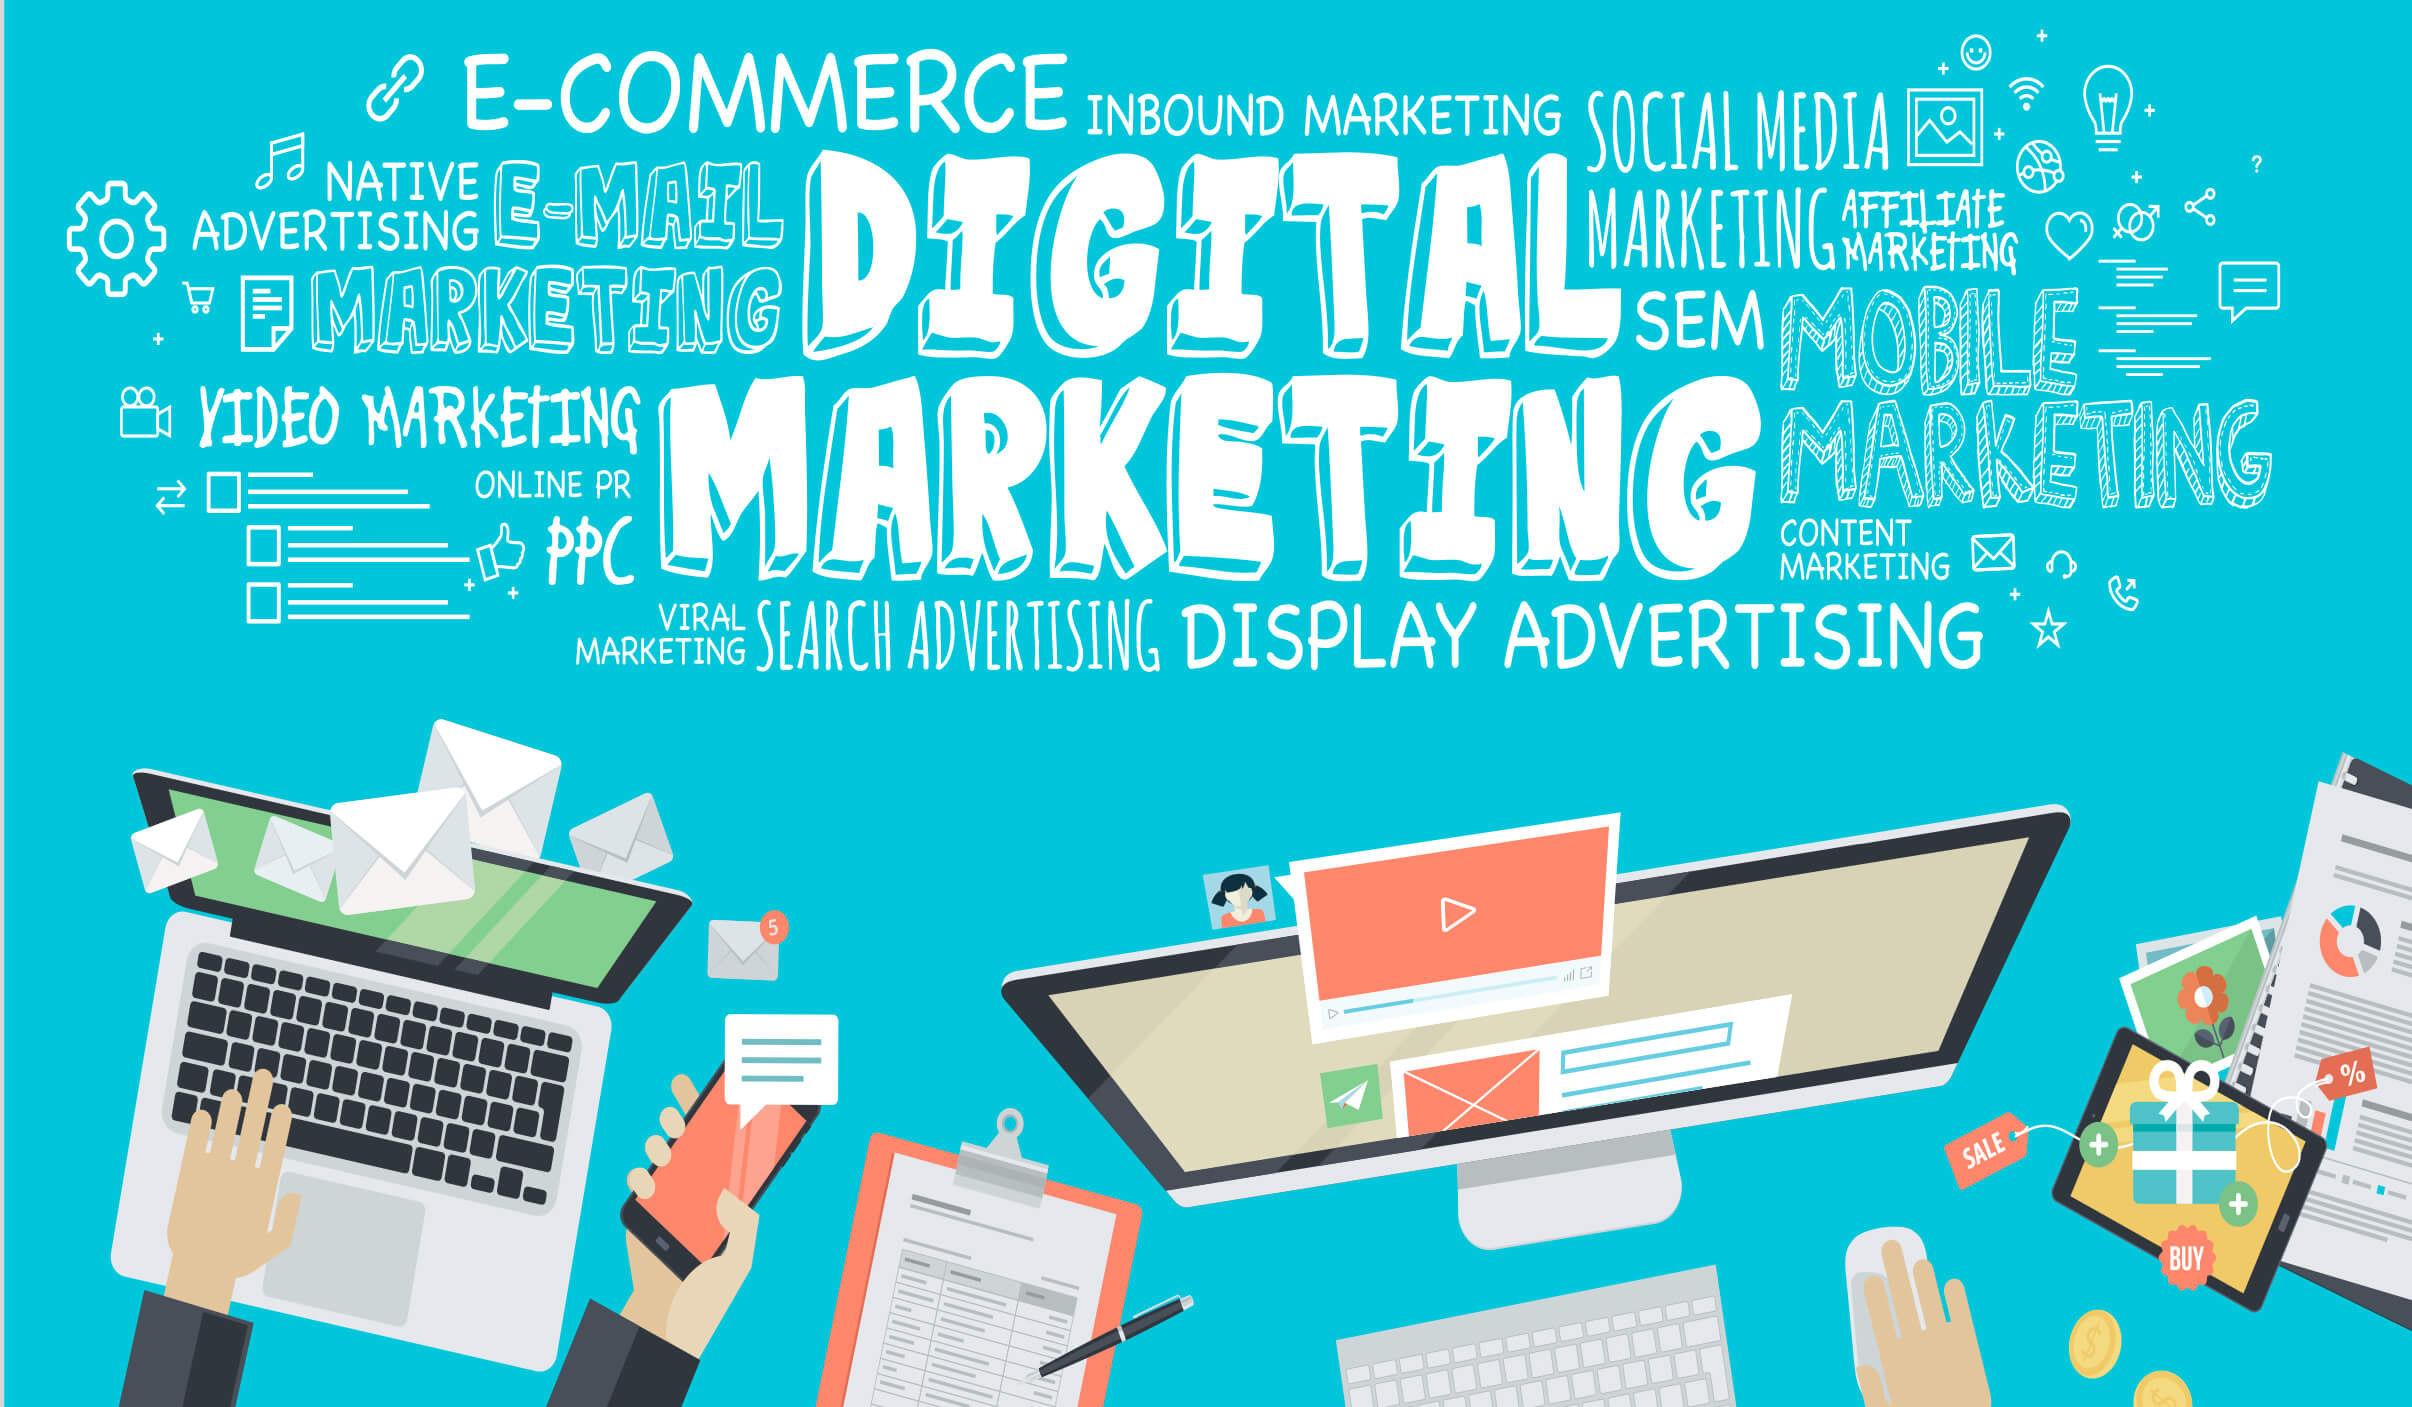 Make your business successful with these digital marketing tips